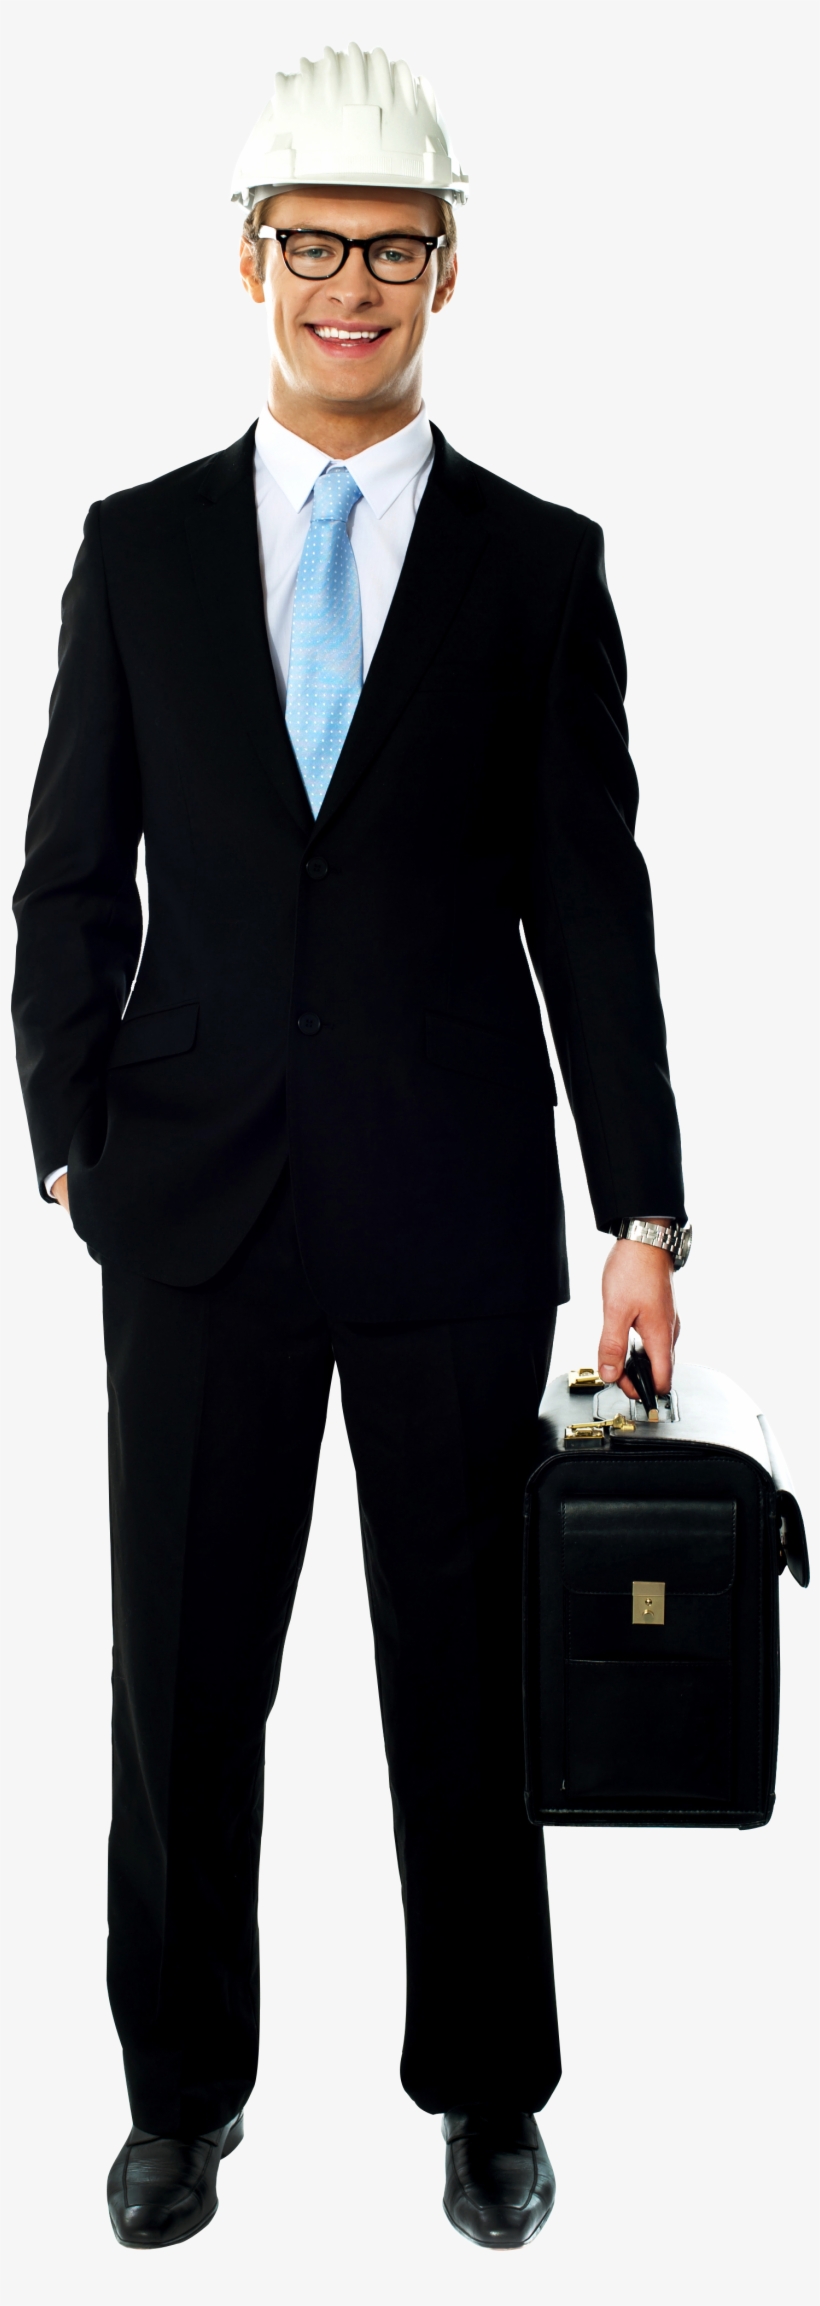 Architect Png Image - Man Carrying A Briefcase, transparent png #2904787